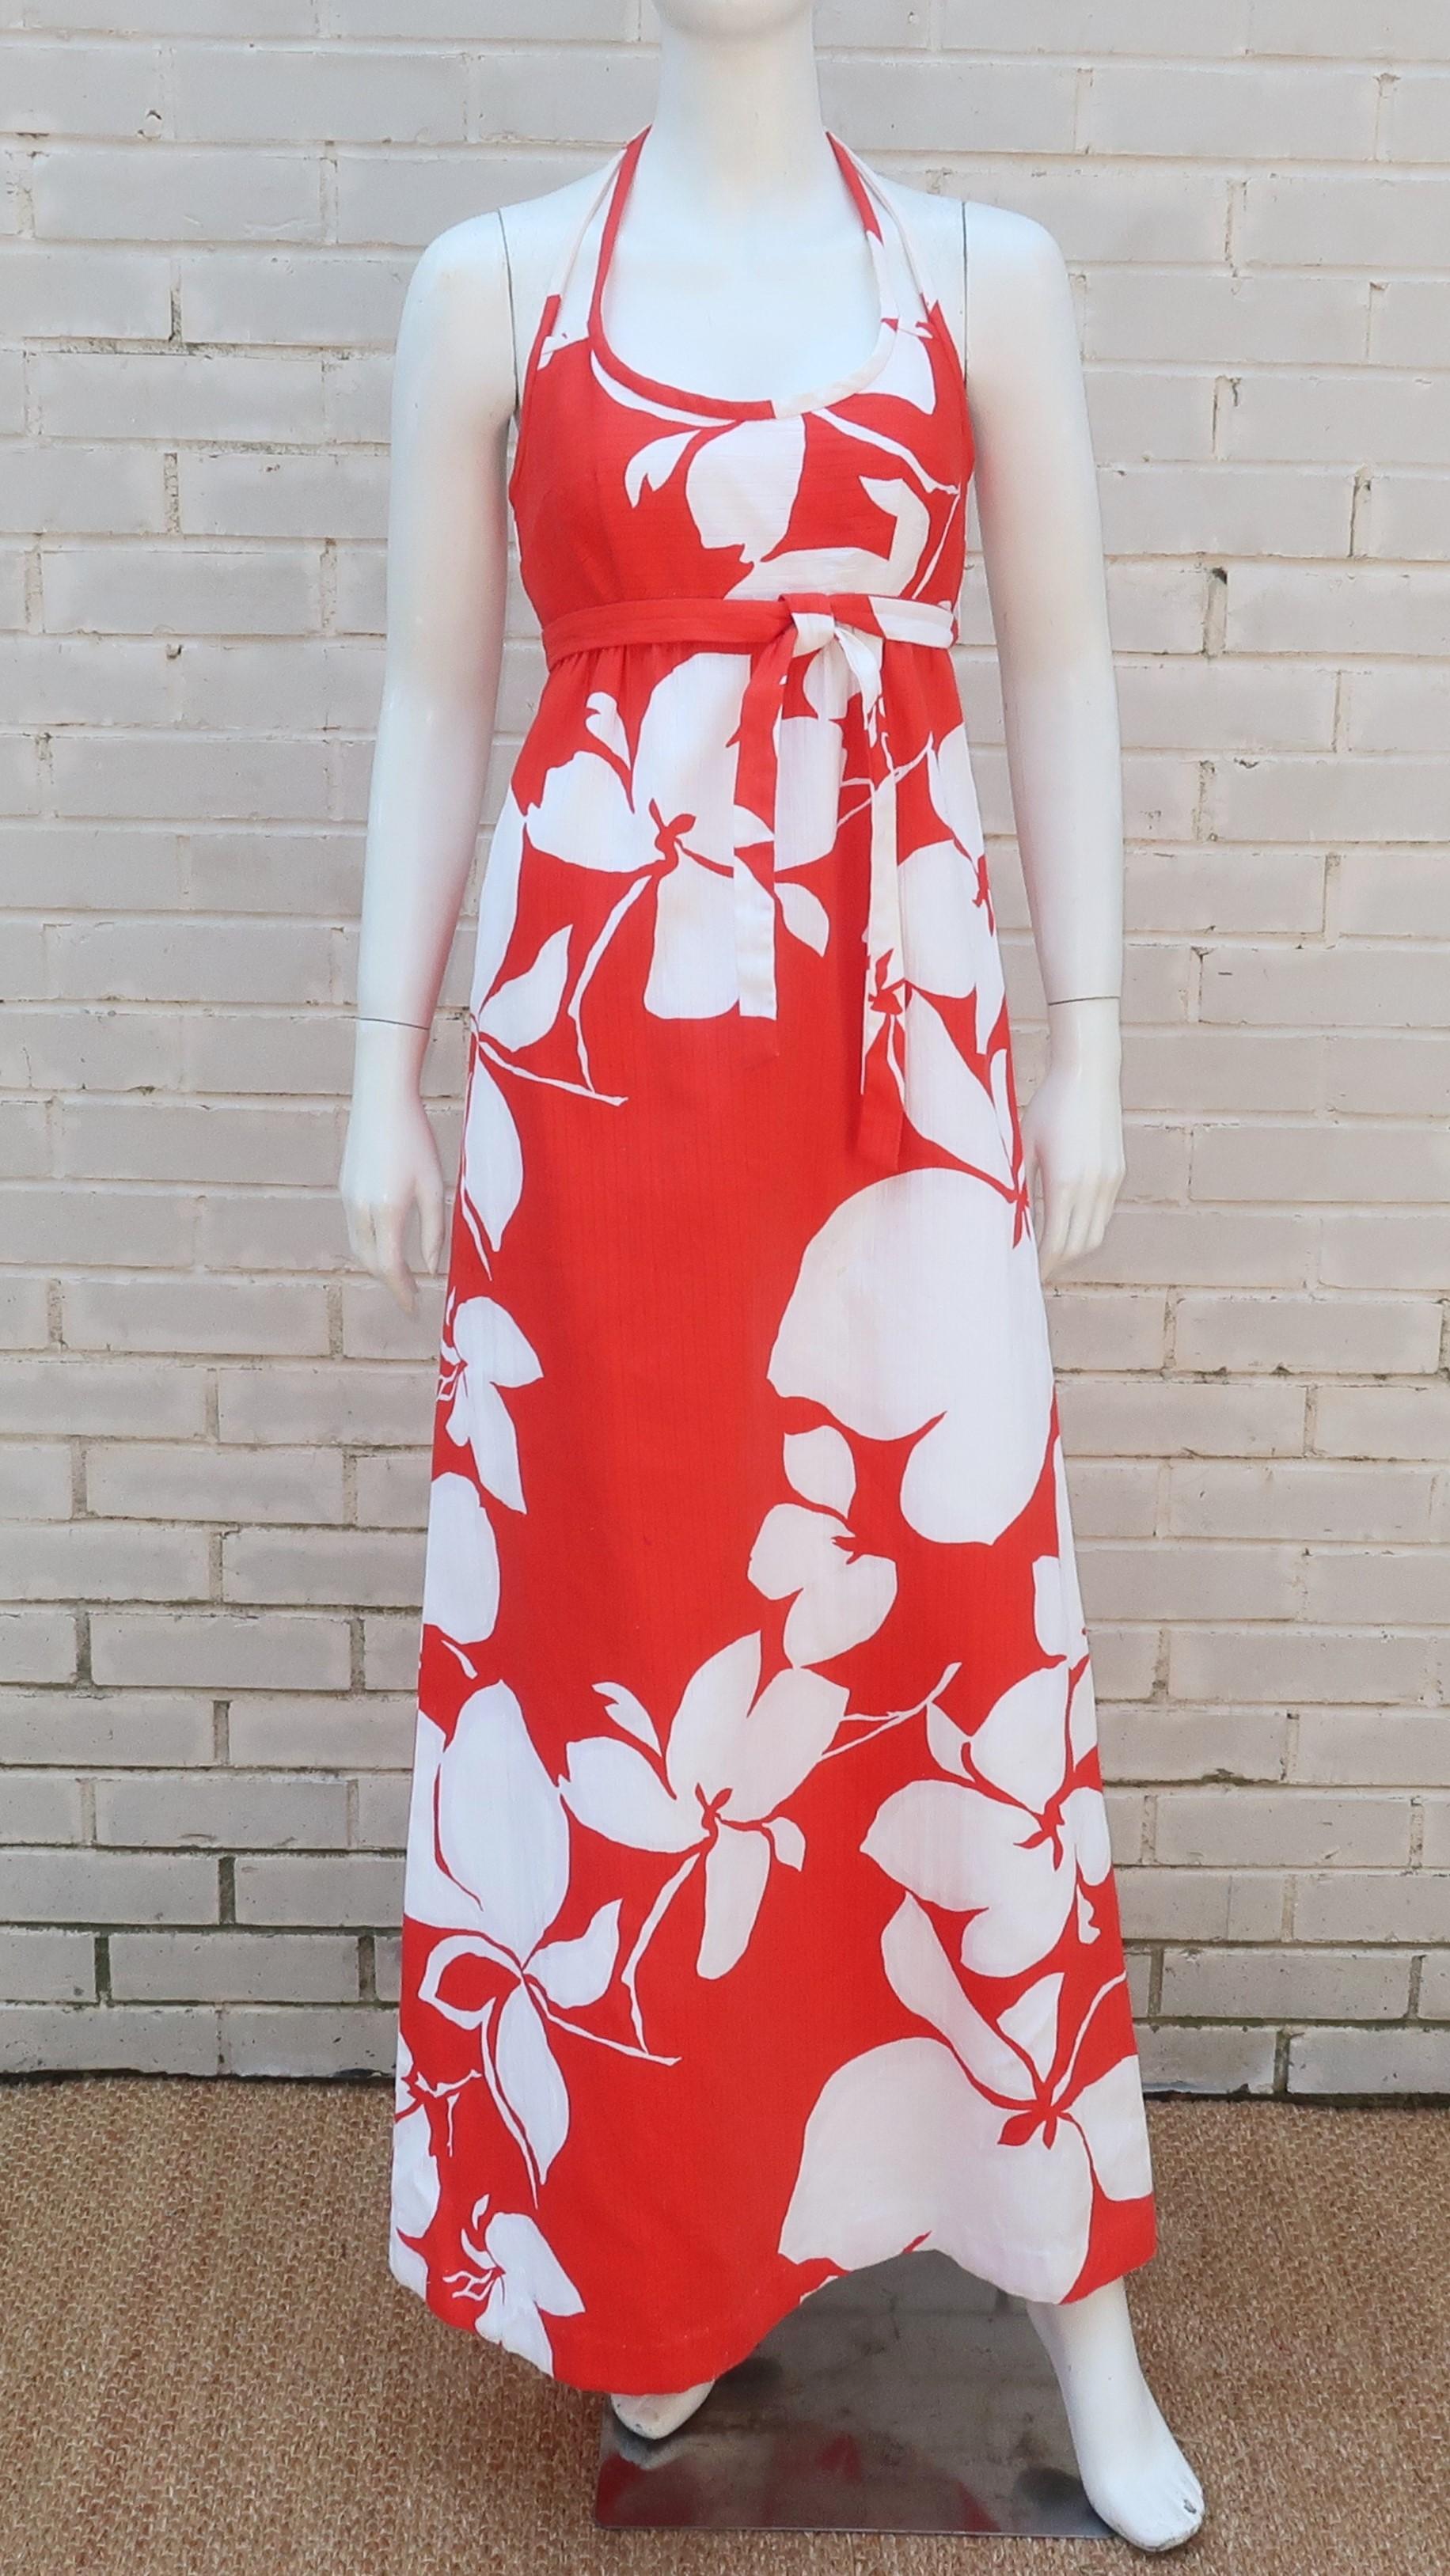 Return to the tropics in this Malia of Honolulu late 1960's abstract floral halter maxi dress in a vibrant color combination of flame red and white.  The heavy cotton fabric has a pique style weave with an empire silhouette accented by double